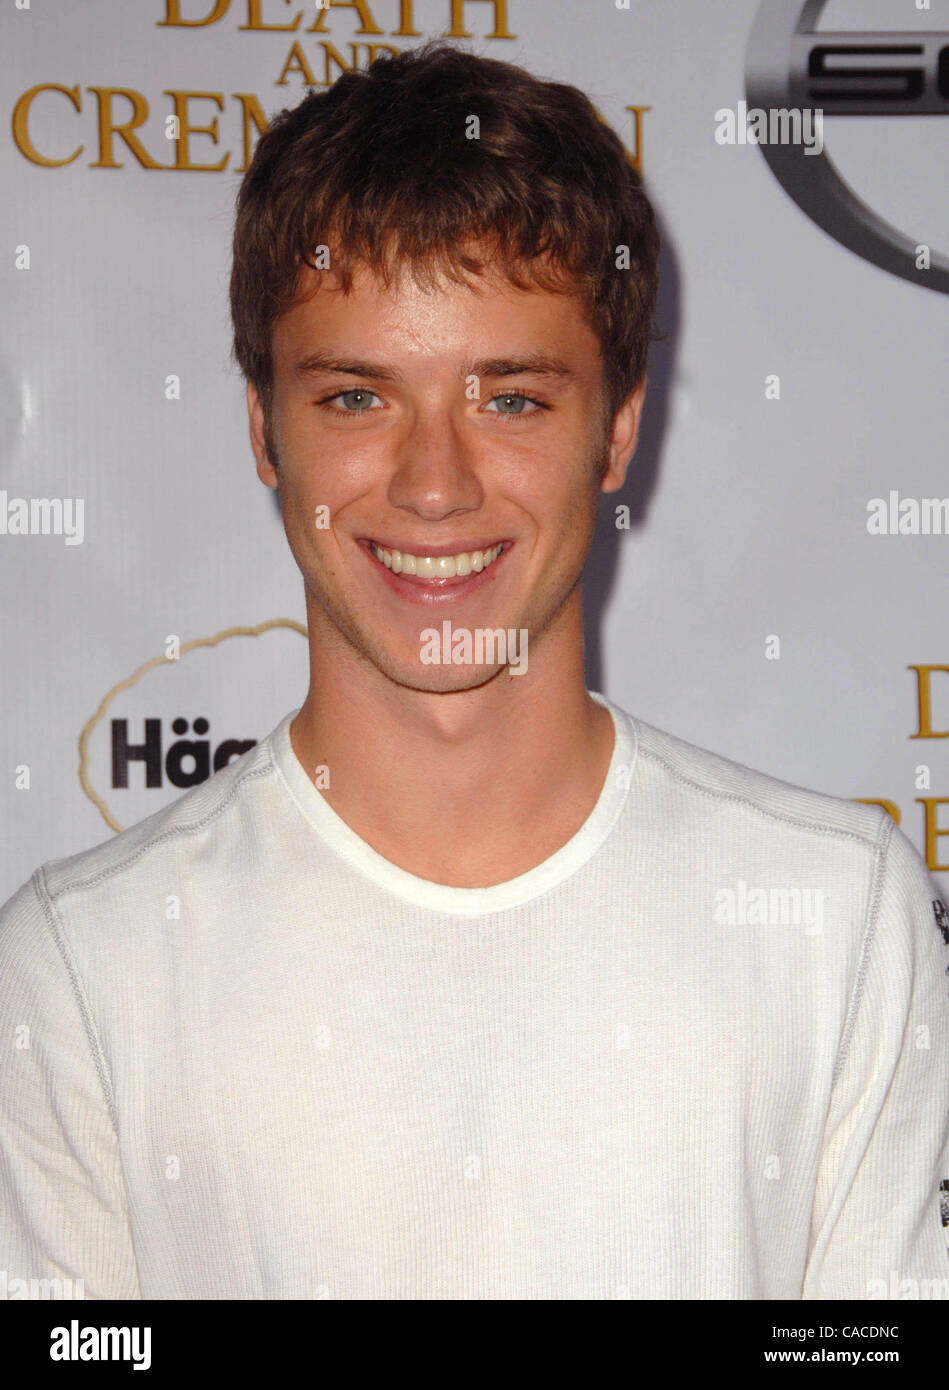 Aug. 26, 2010 - Los Angeles, California, U.S. - JEREMY SUMPTER  Attending The Los Angeles Premiere Of  Death And Creamation Held At Zanuck Theater In Los Angeles, California On August 26, 2010. 2010.K66193LONG(Credit Image: Â© D. Long/Globe Photos/ZUMApress.com) Stock Photo